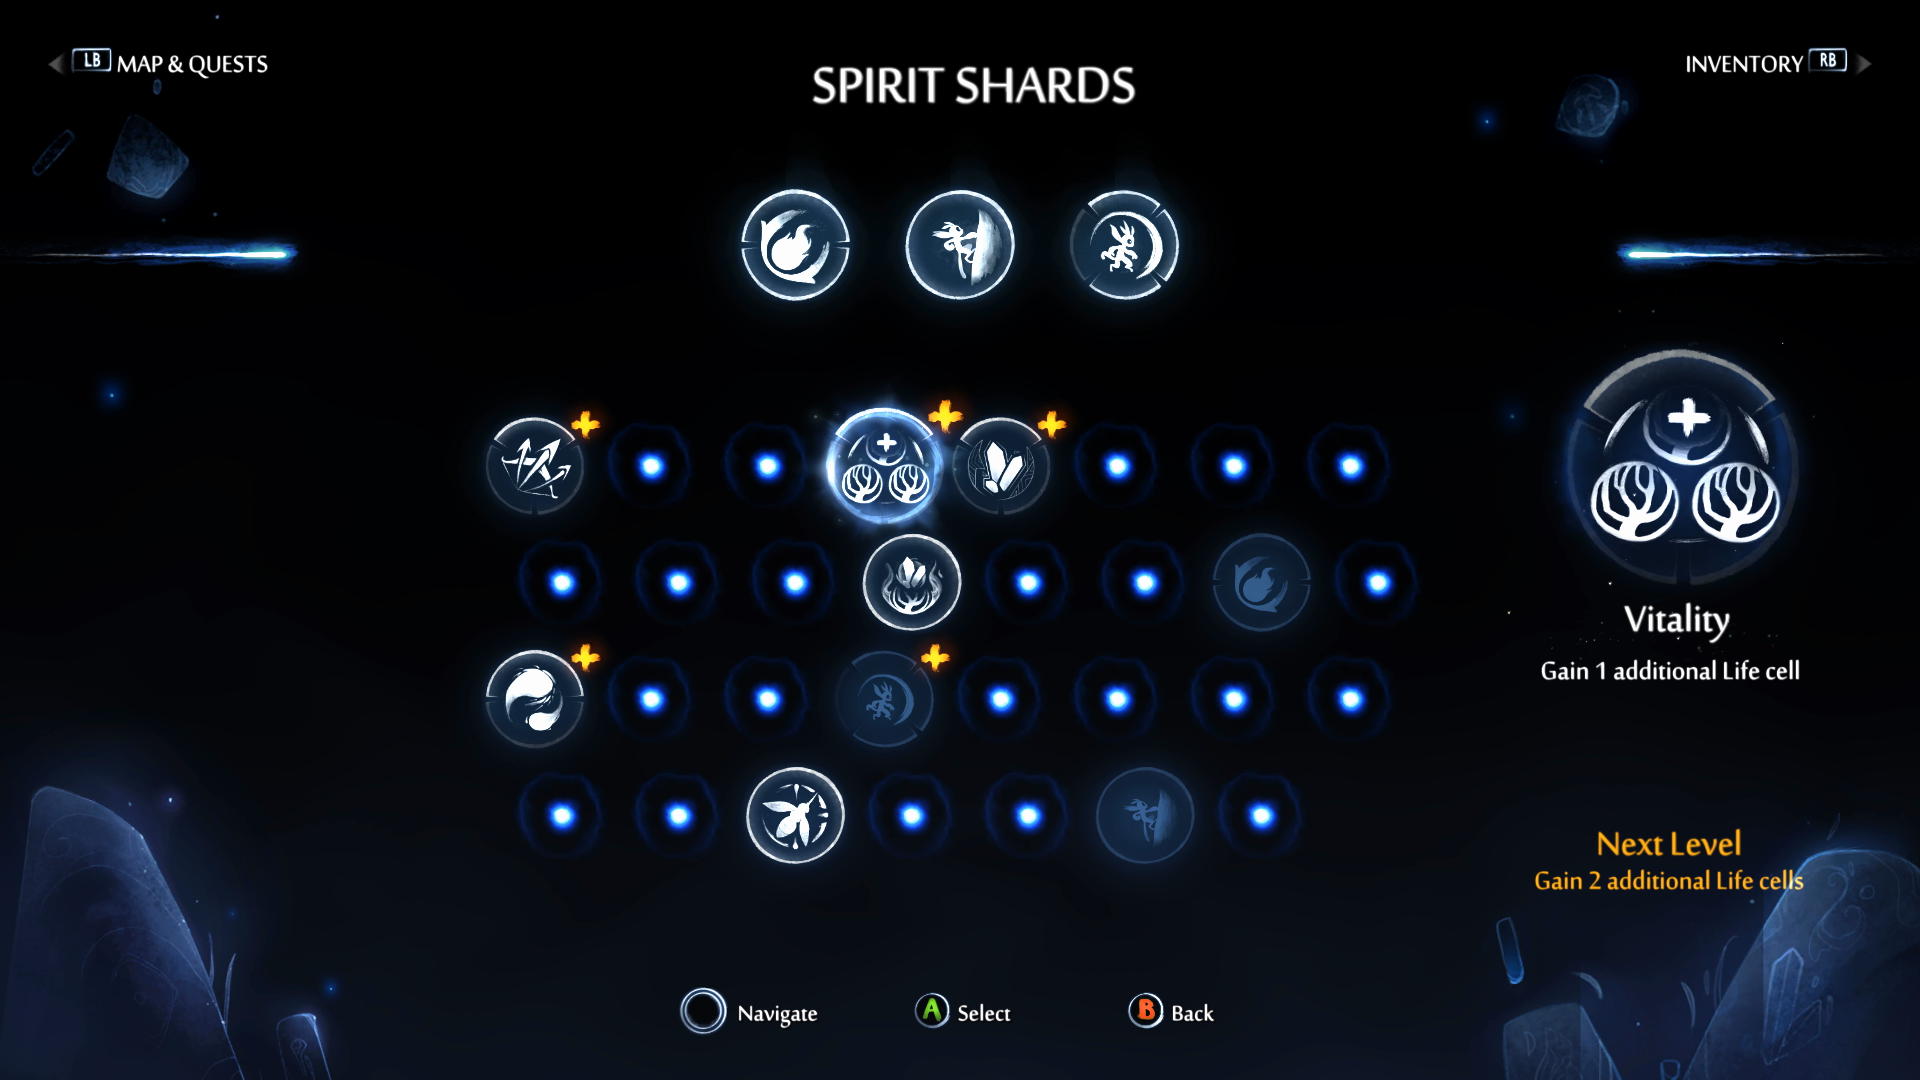 The spirit shards menu in Ori and the Will of the Wisps. There are rows of orbs to indicate a collected shard. There are small blue dots for shards that haven't been found. 